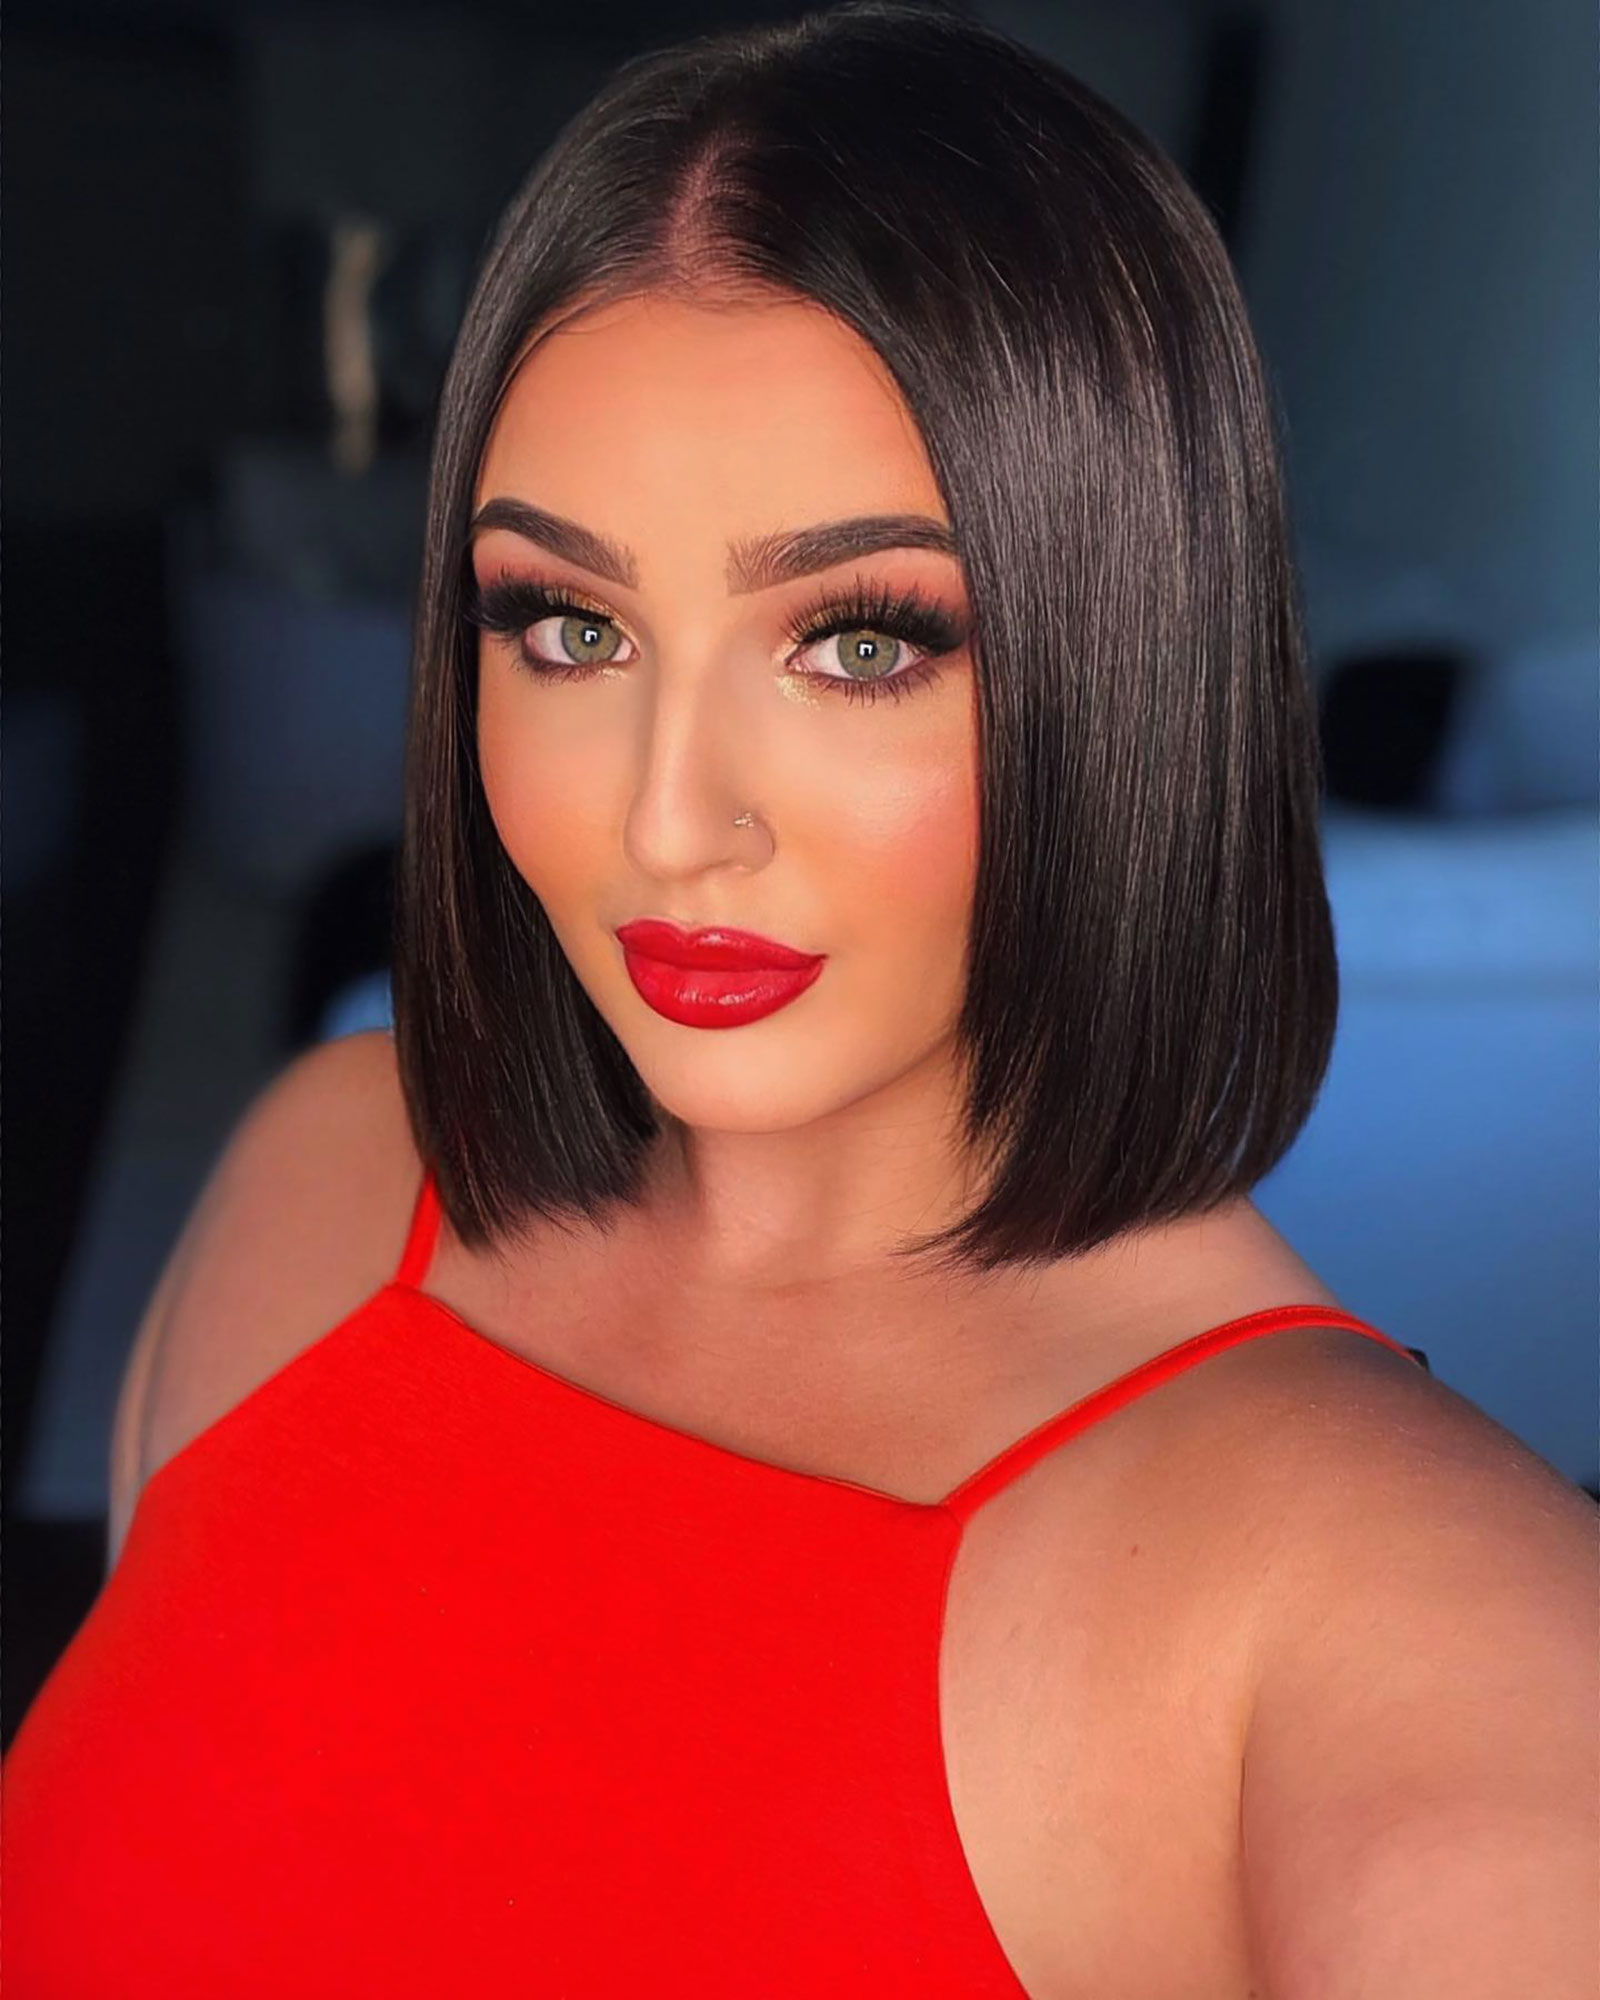 Mikayla Nogueira 5 Things to Know About the Beauty Influencer